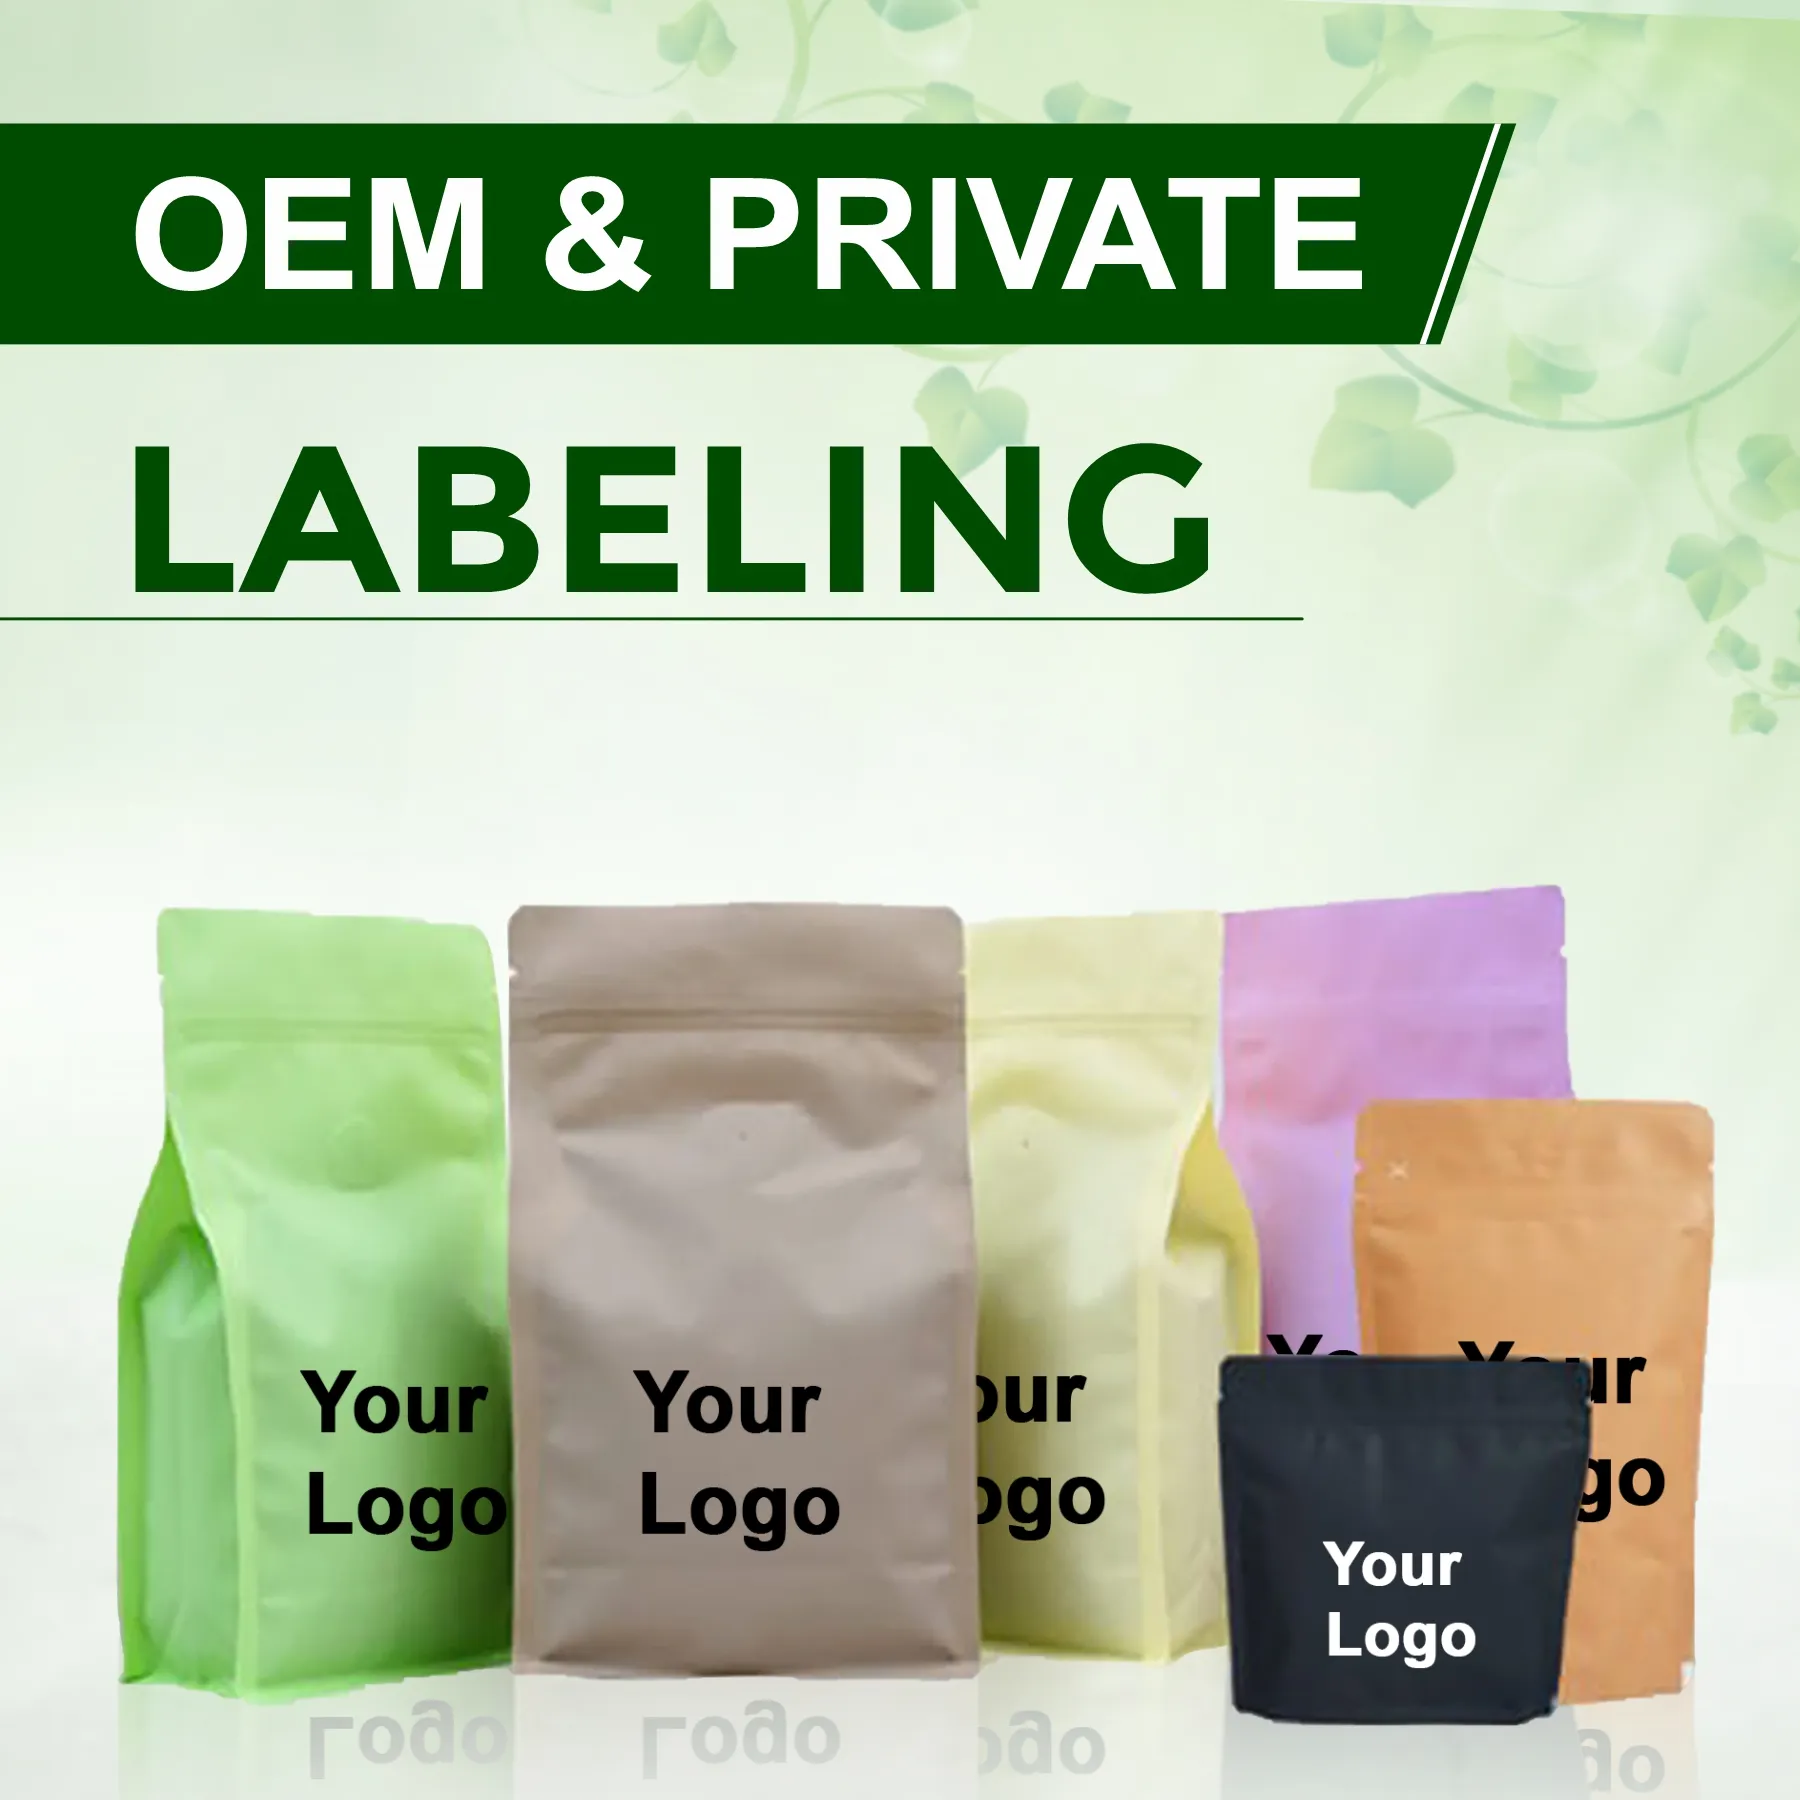 Private Labeling and OEM mobile banner - www.dkihenna.com